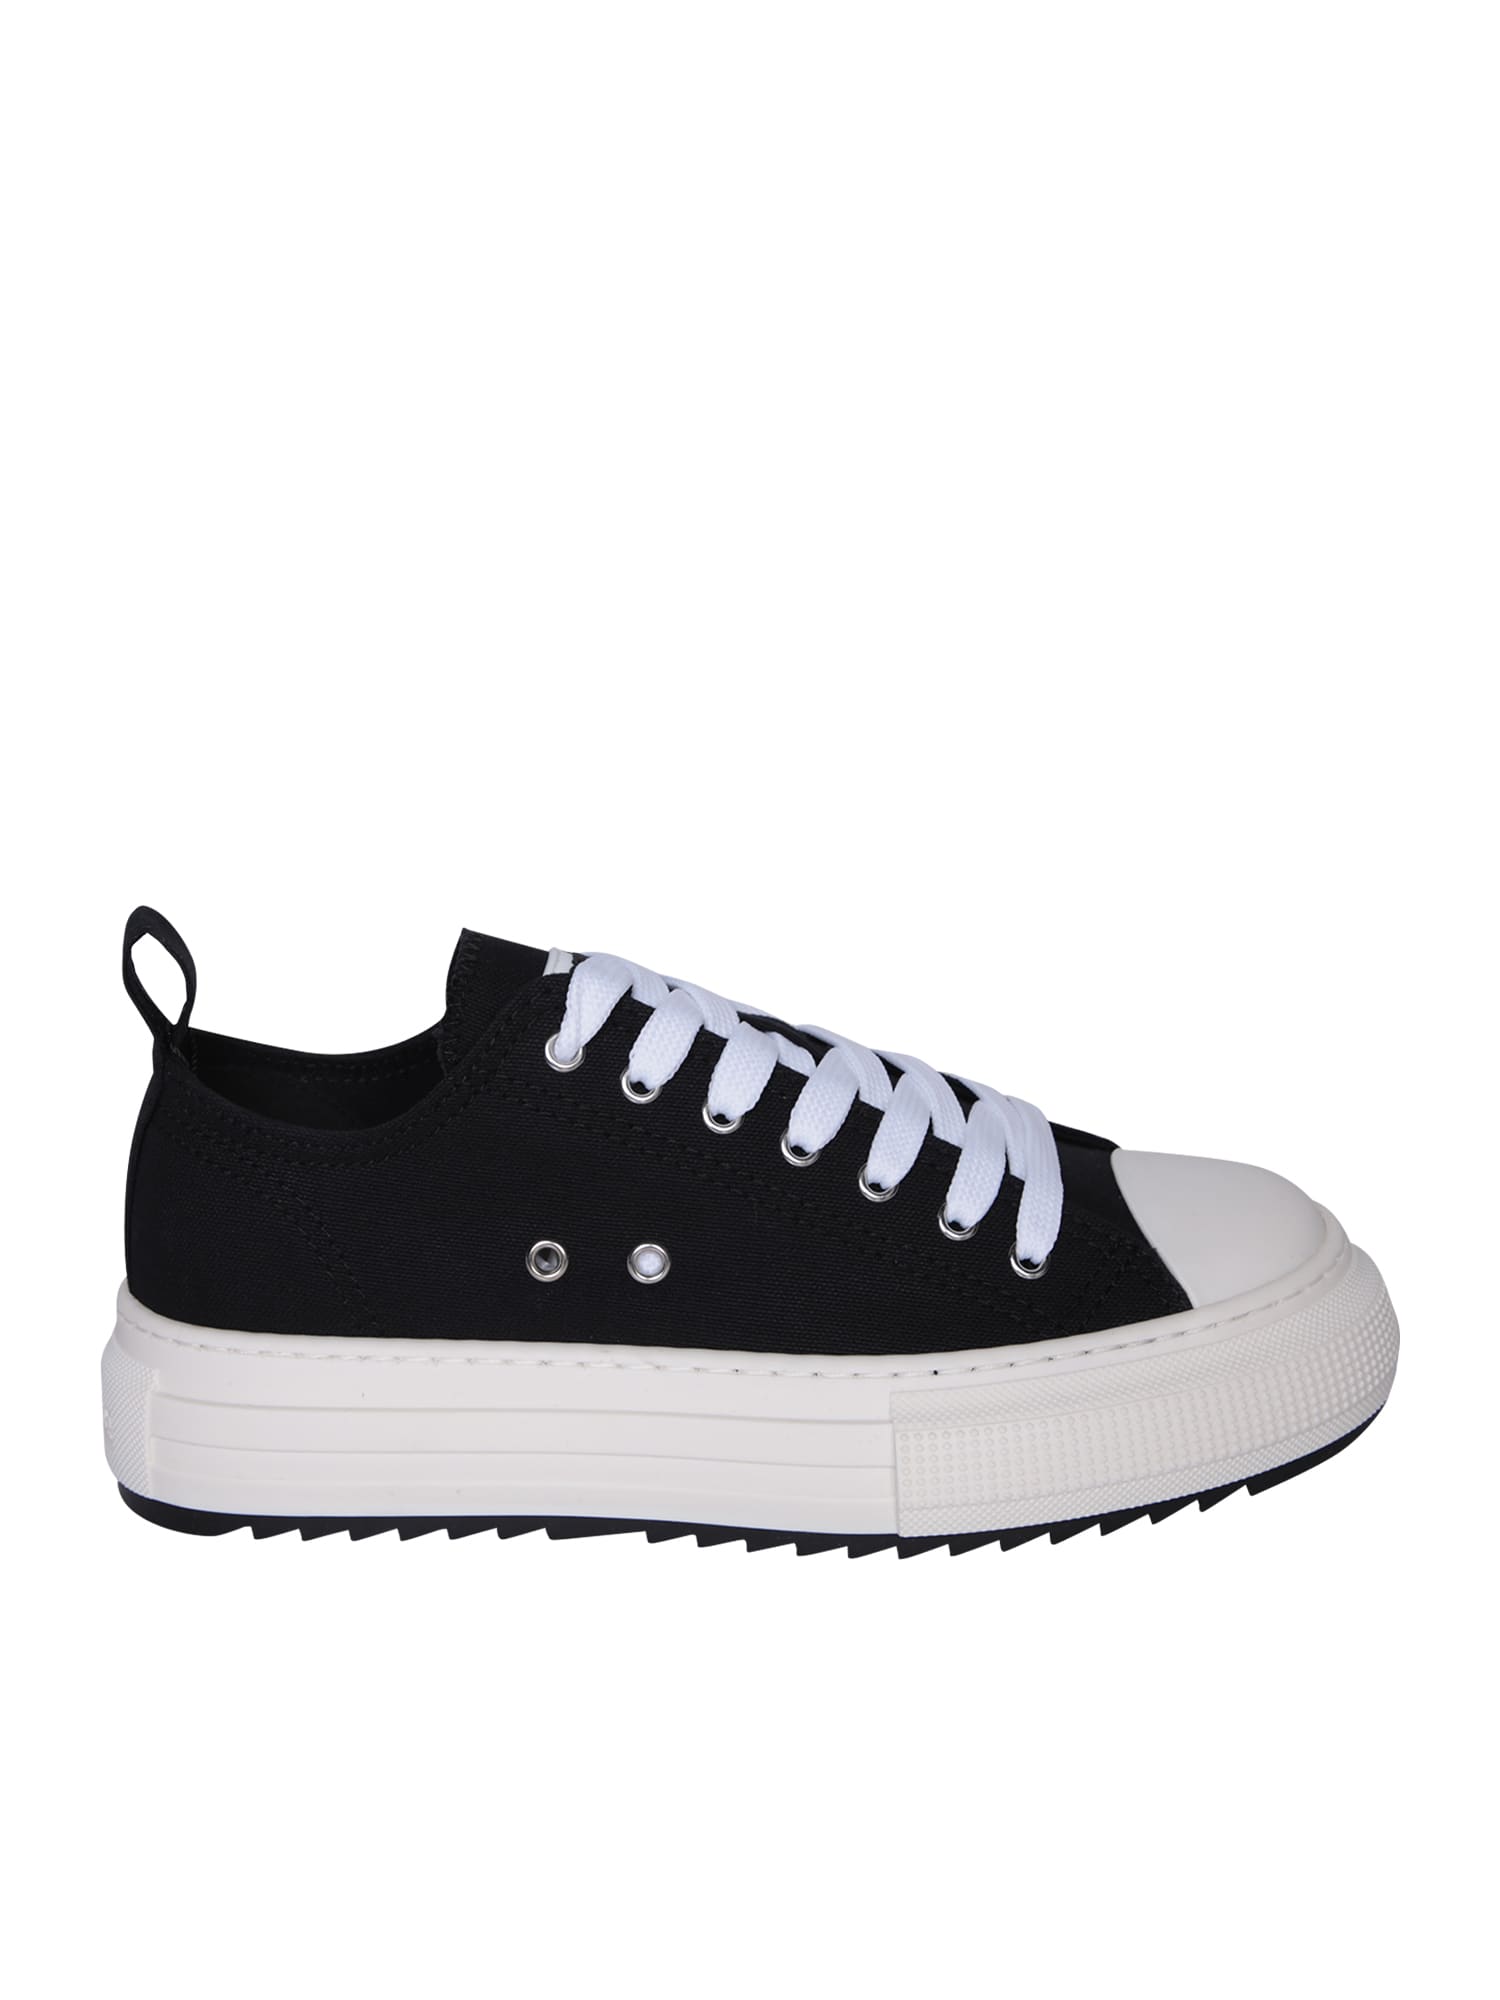 DSQUARED2 BERLIN LACE-UP SNEAKERS